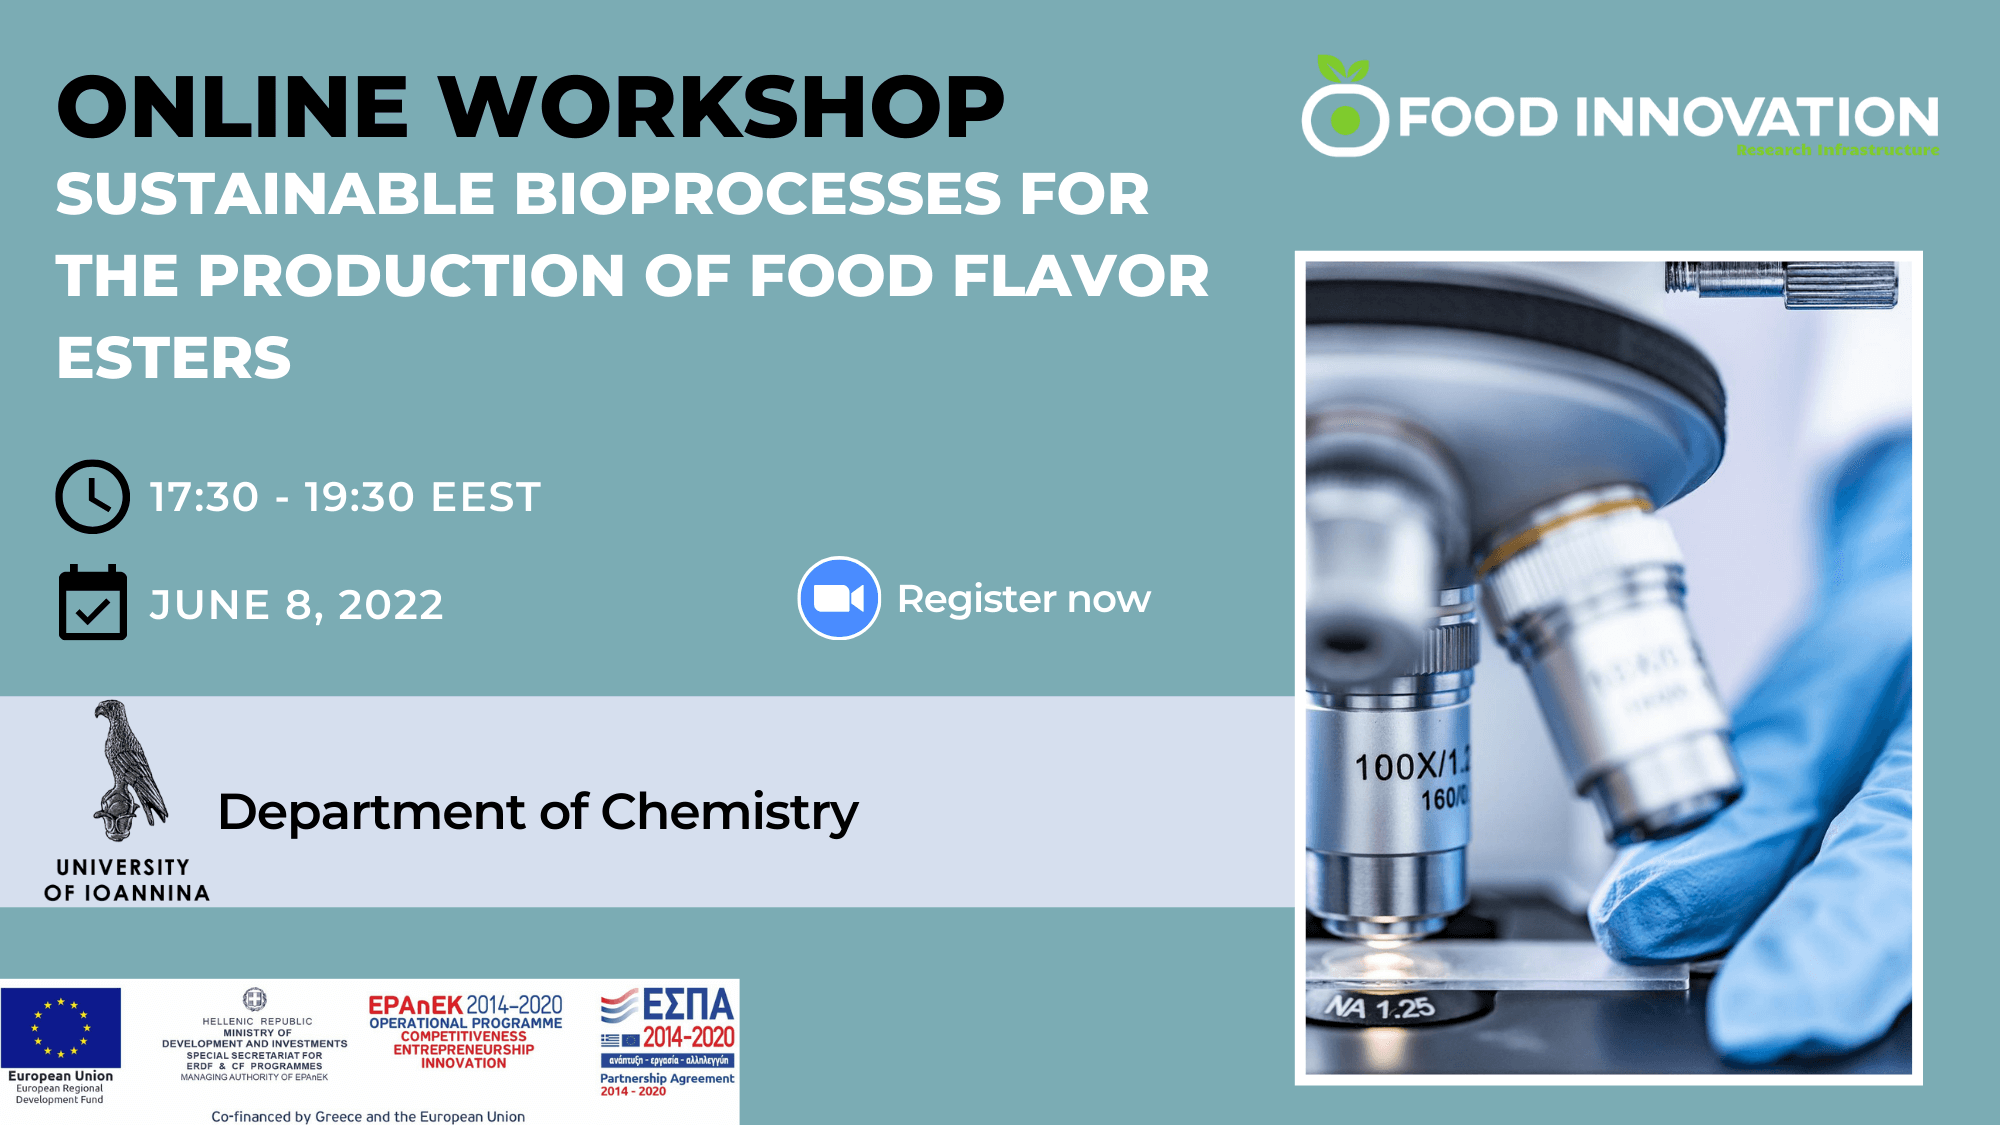 An online workshop on sustainable bioprocess for the production of food flavor esters